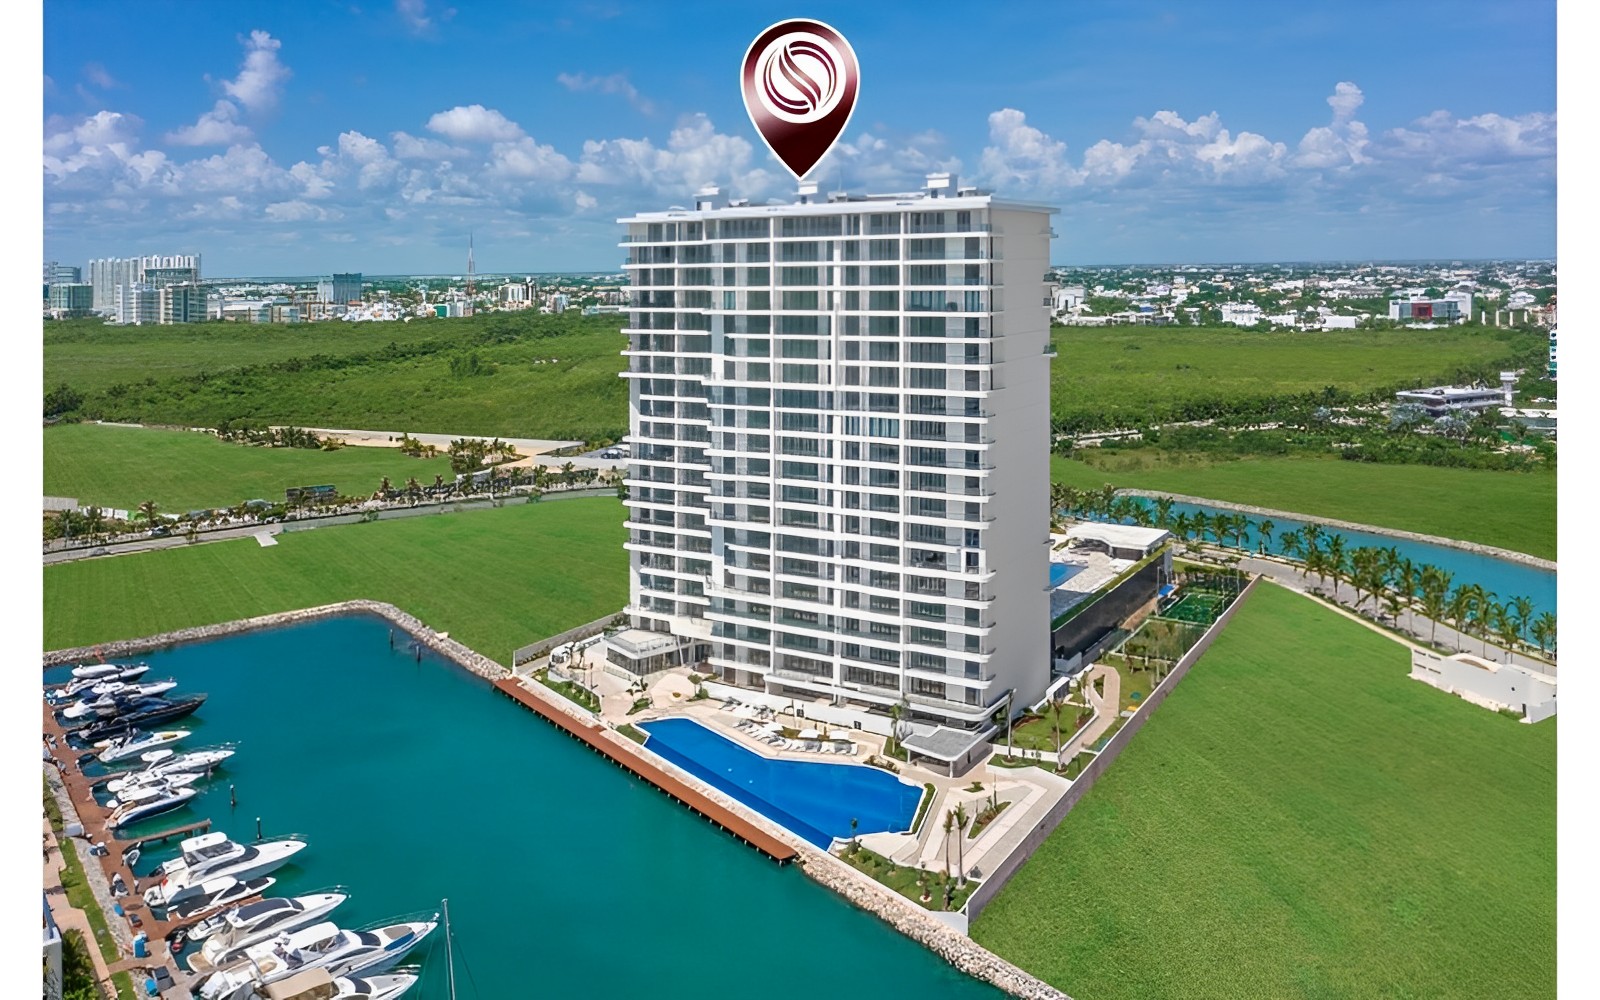 Beautiful view of the sea and the marina, apartment with amenities: infinity pool, spa, gym, lounge area, event room, lobby